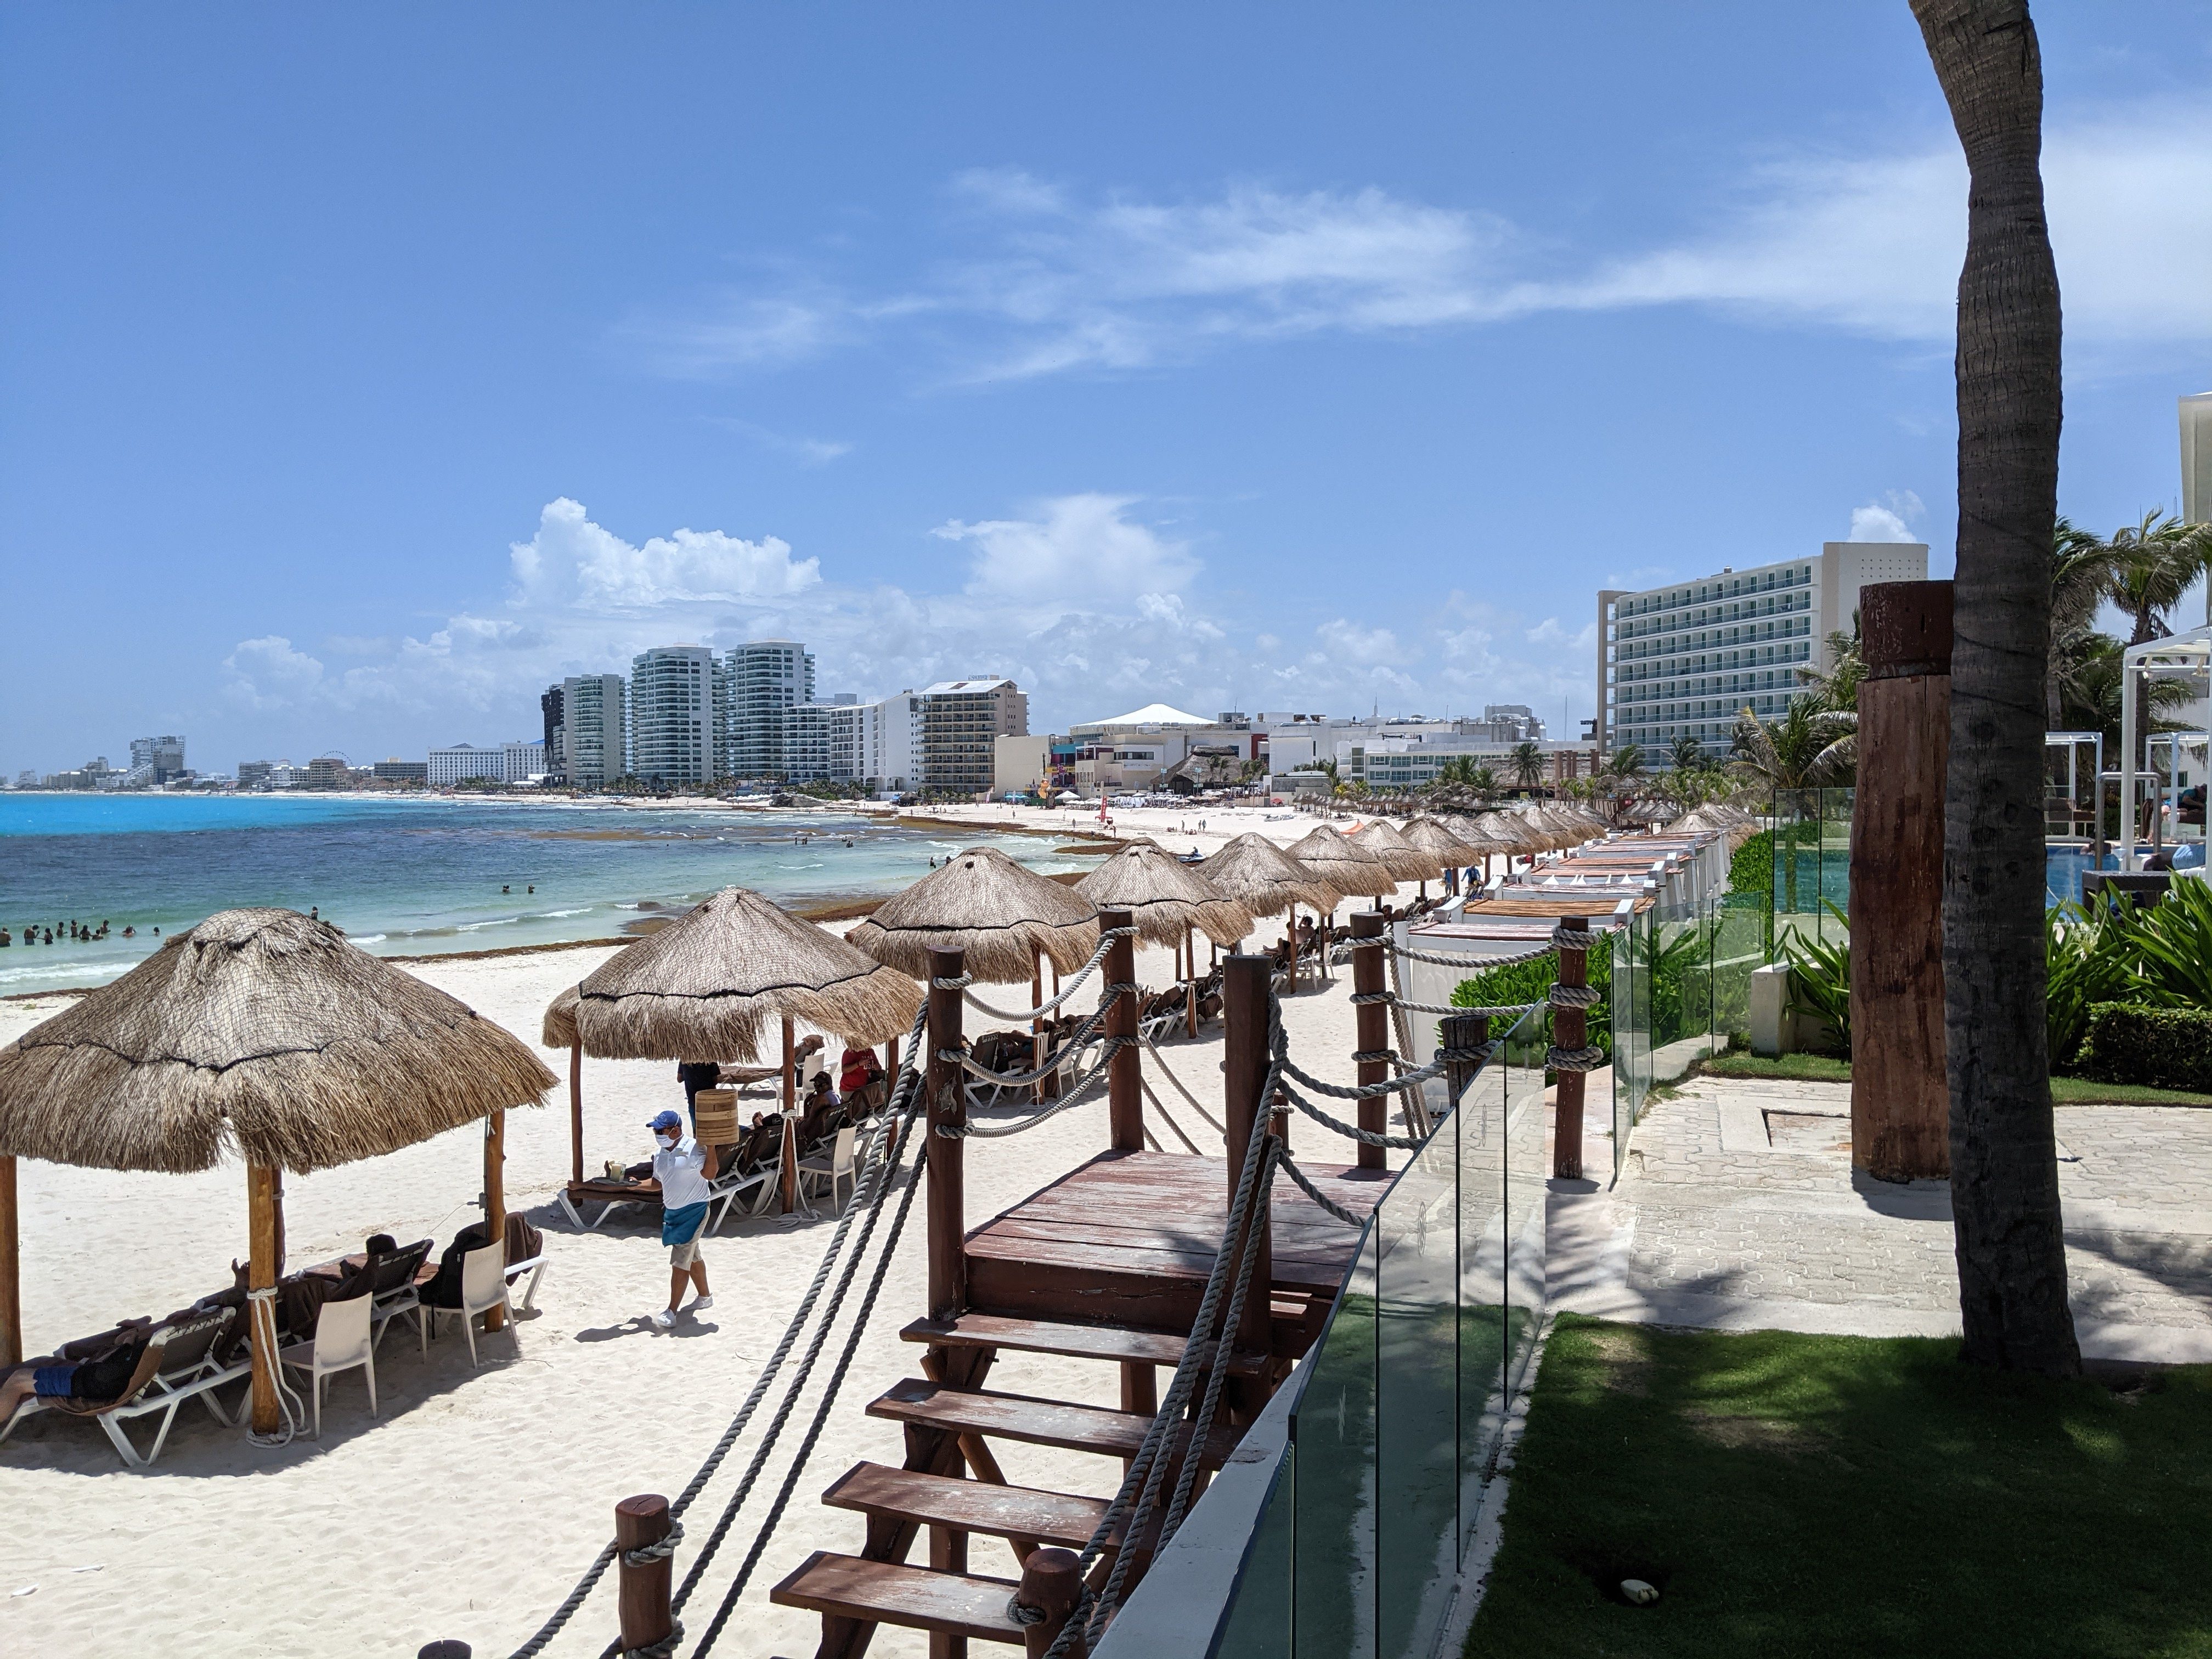 My Mexican travels start in Cancun